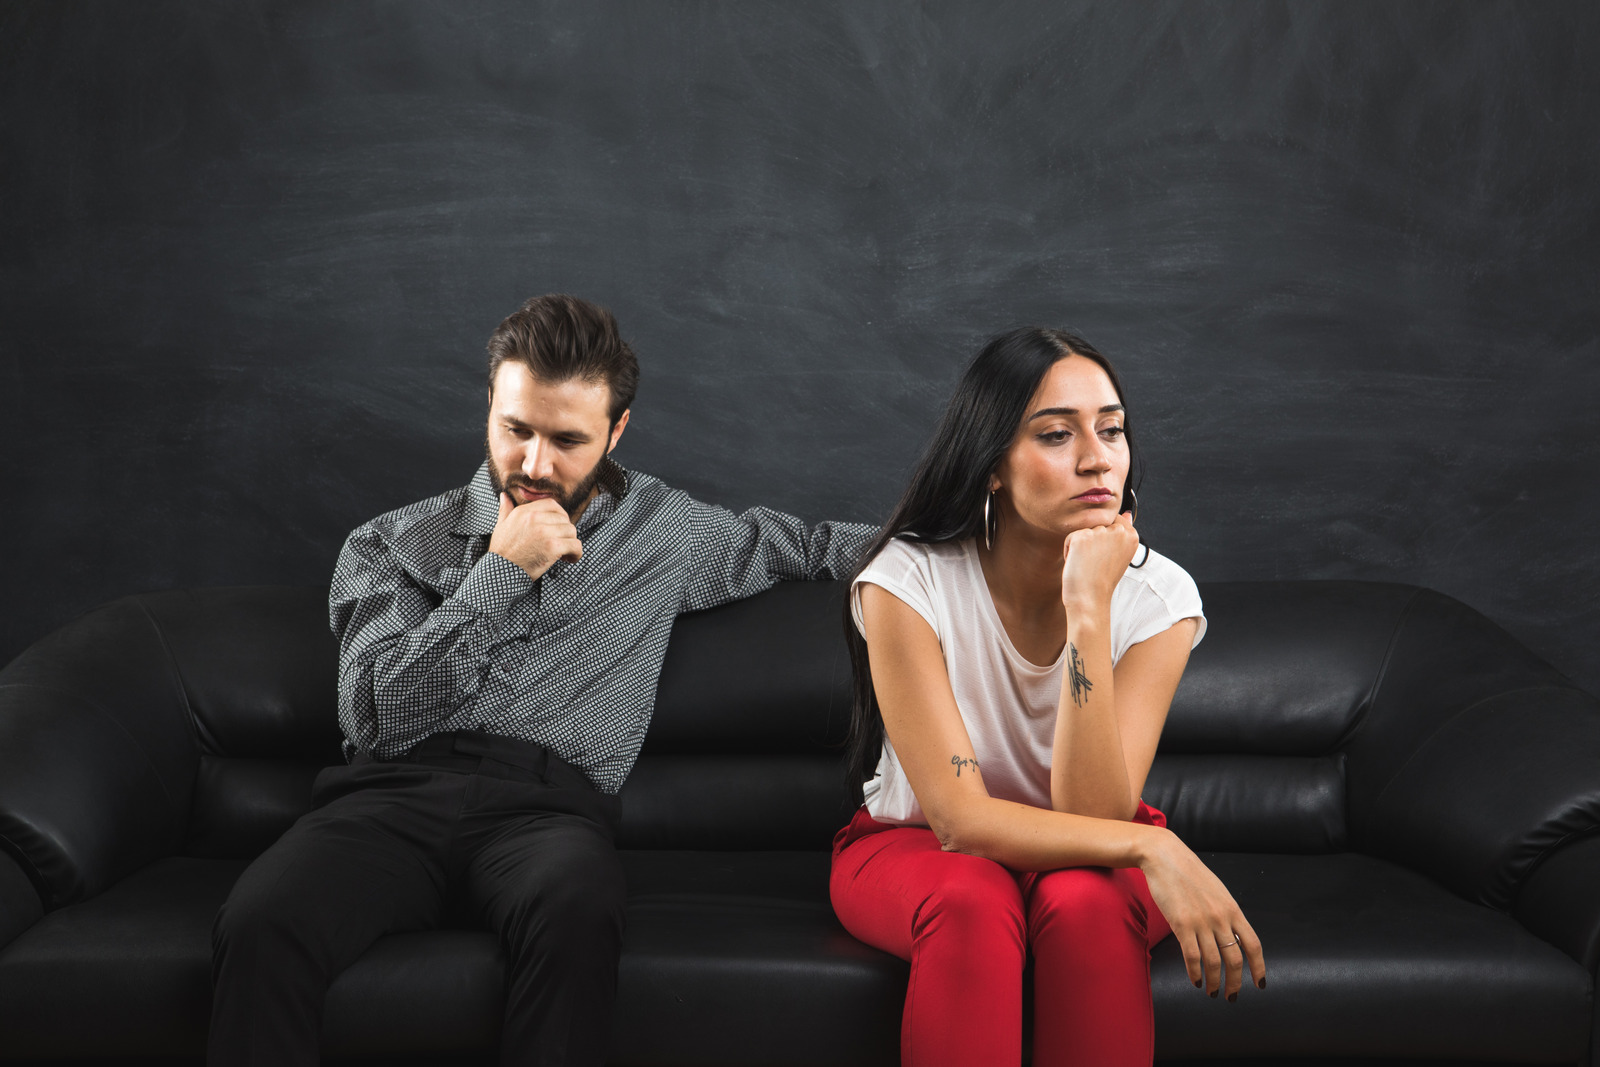 10 People Explain the Exact Reason Why They Cheated On Their Spouse